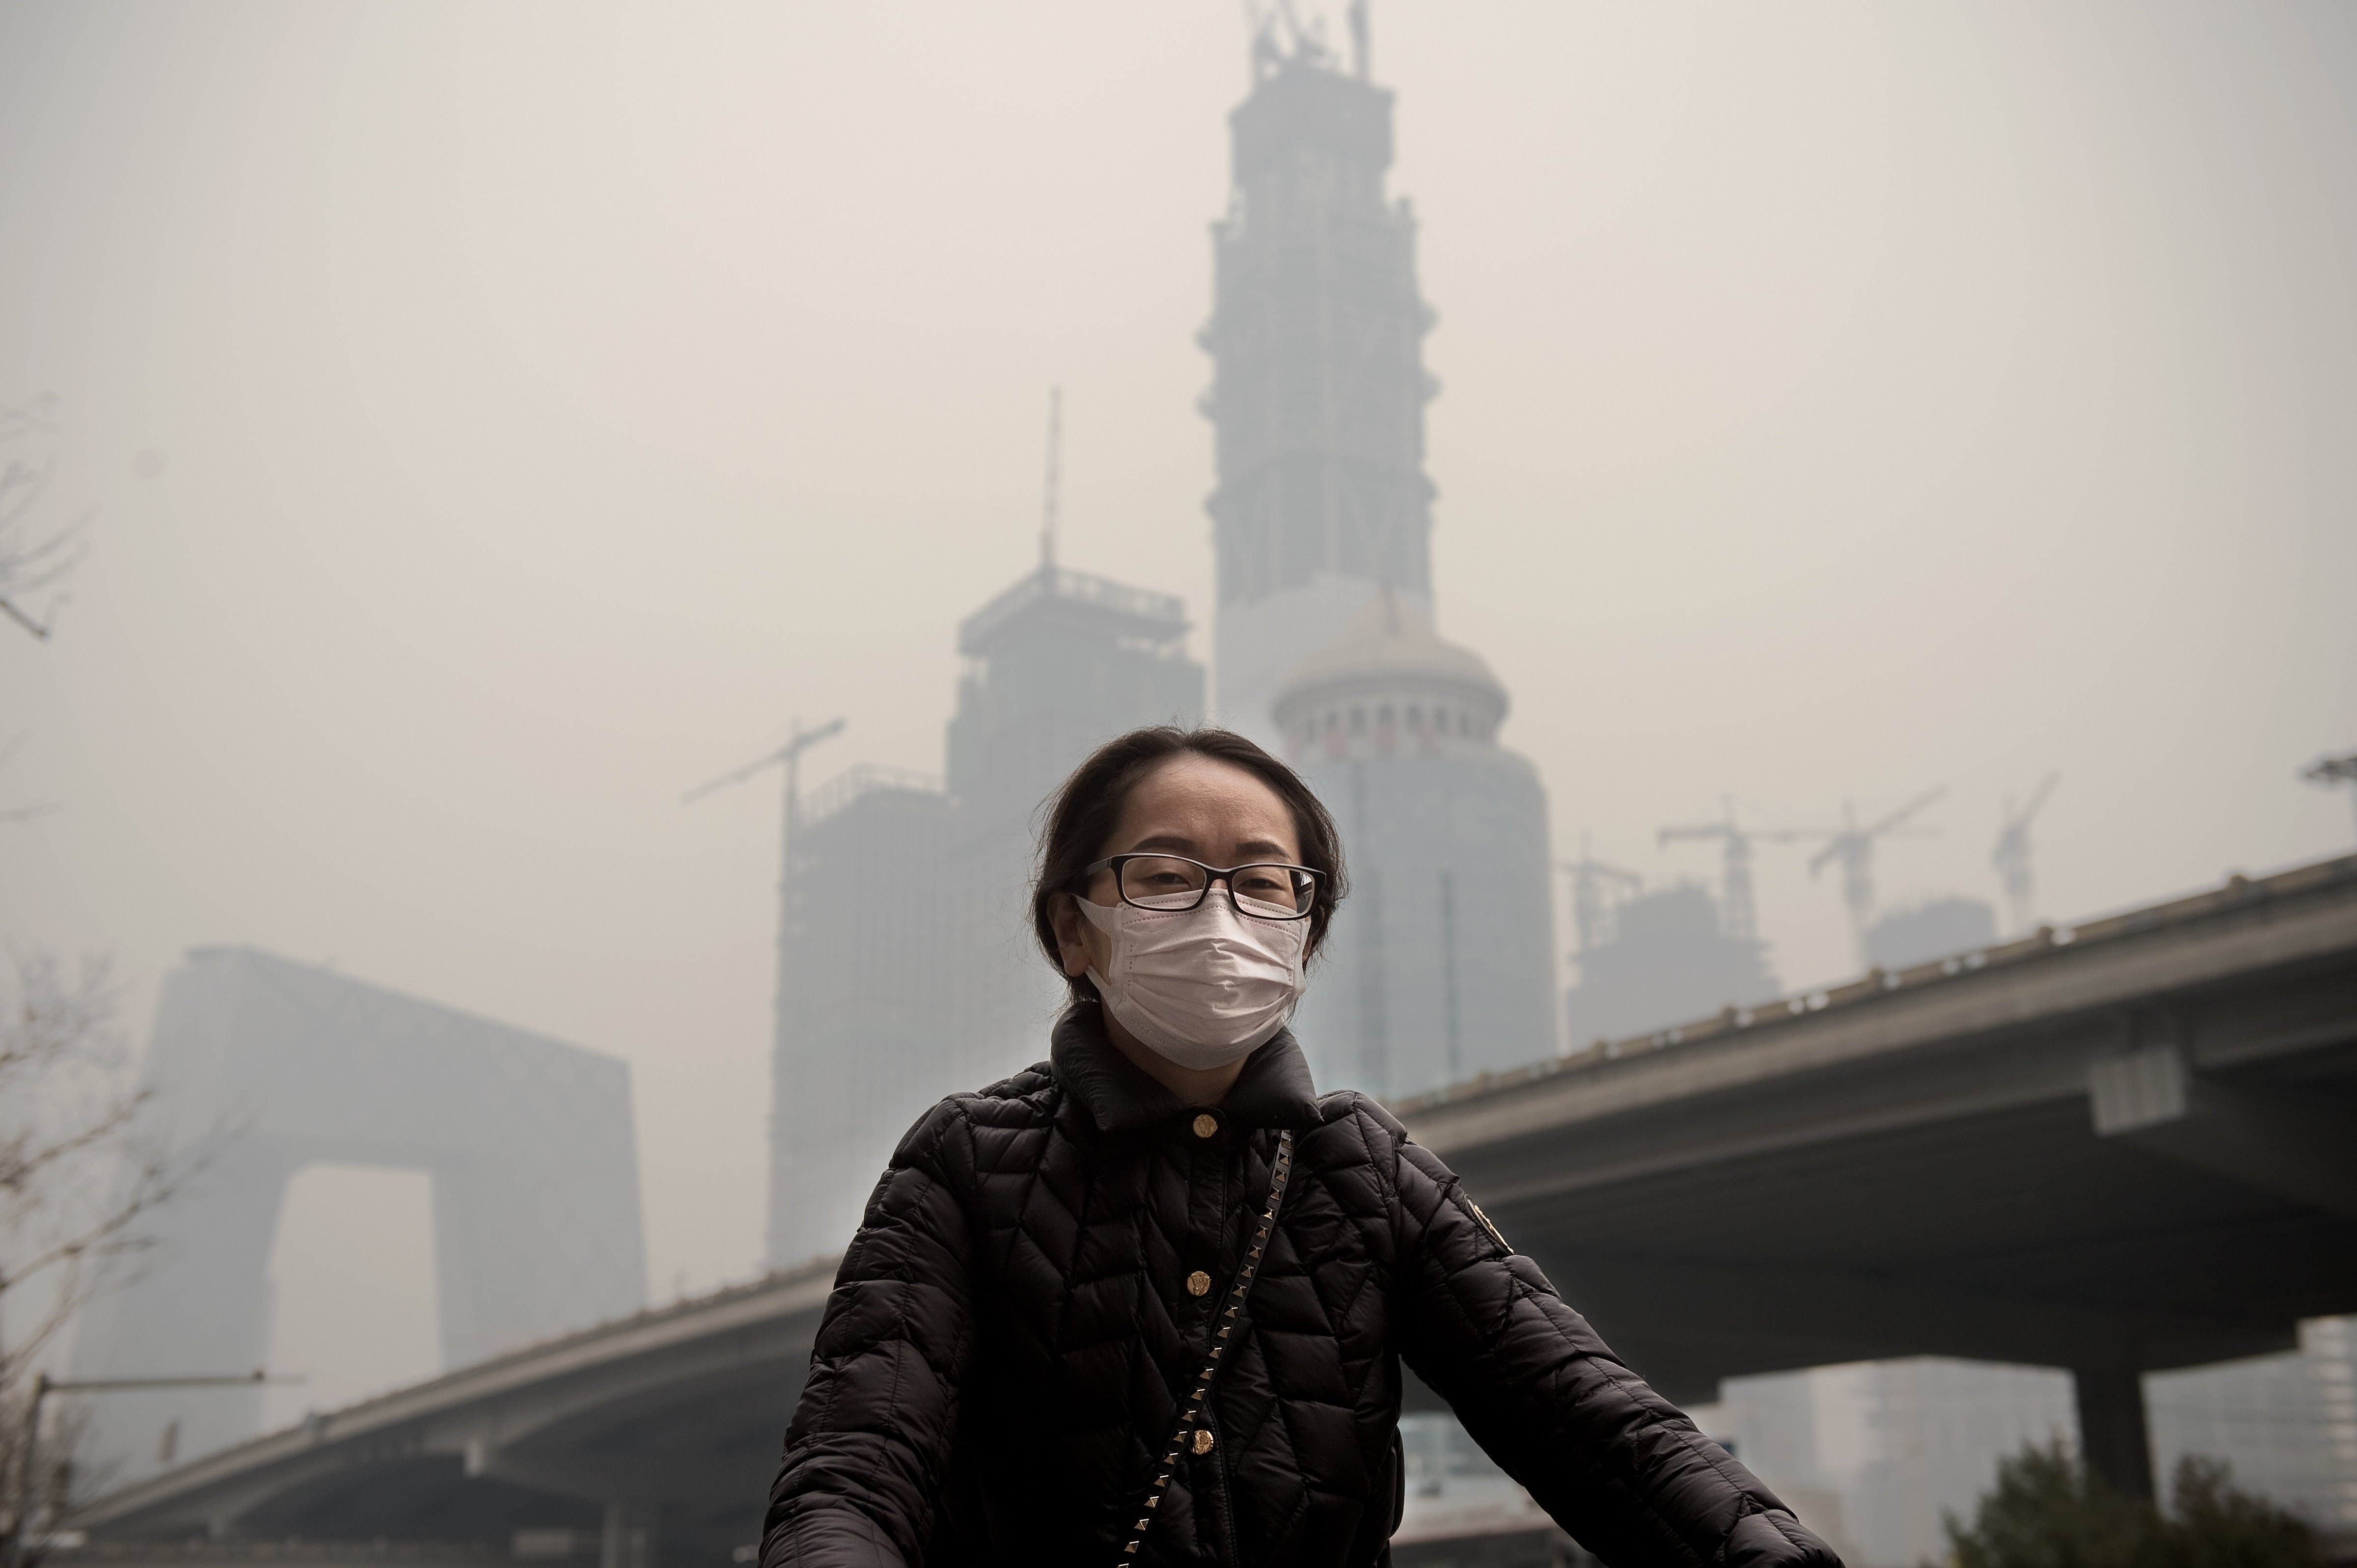 A woman wearing a protective pollution mask rides a bicycle in Beijing, China, on March 20, 2017. (Nicolas Asfouri&mdash;AFP/Getty Images)